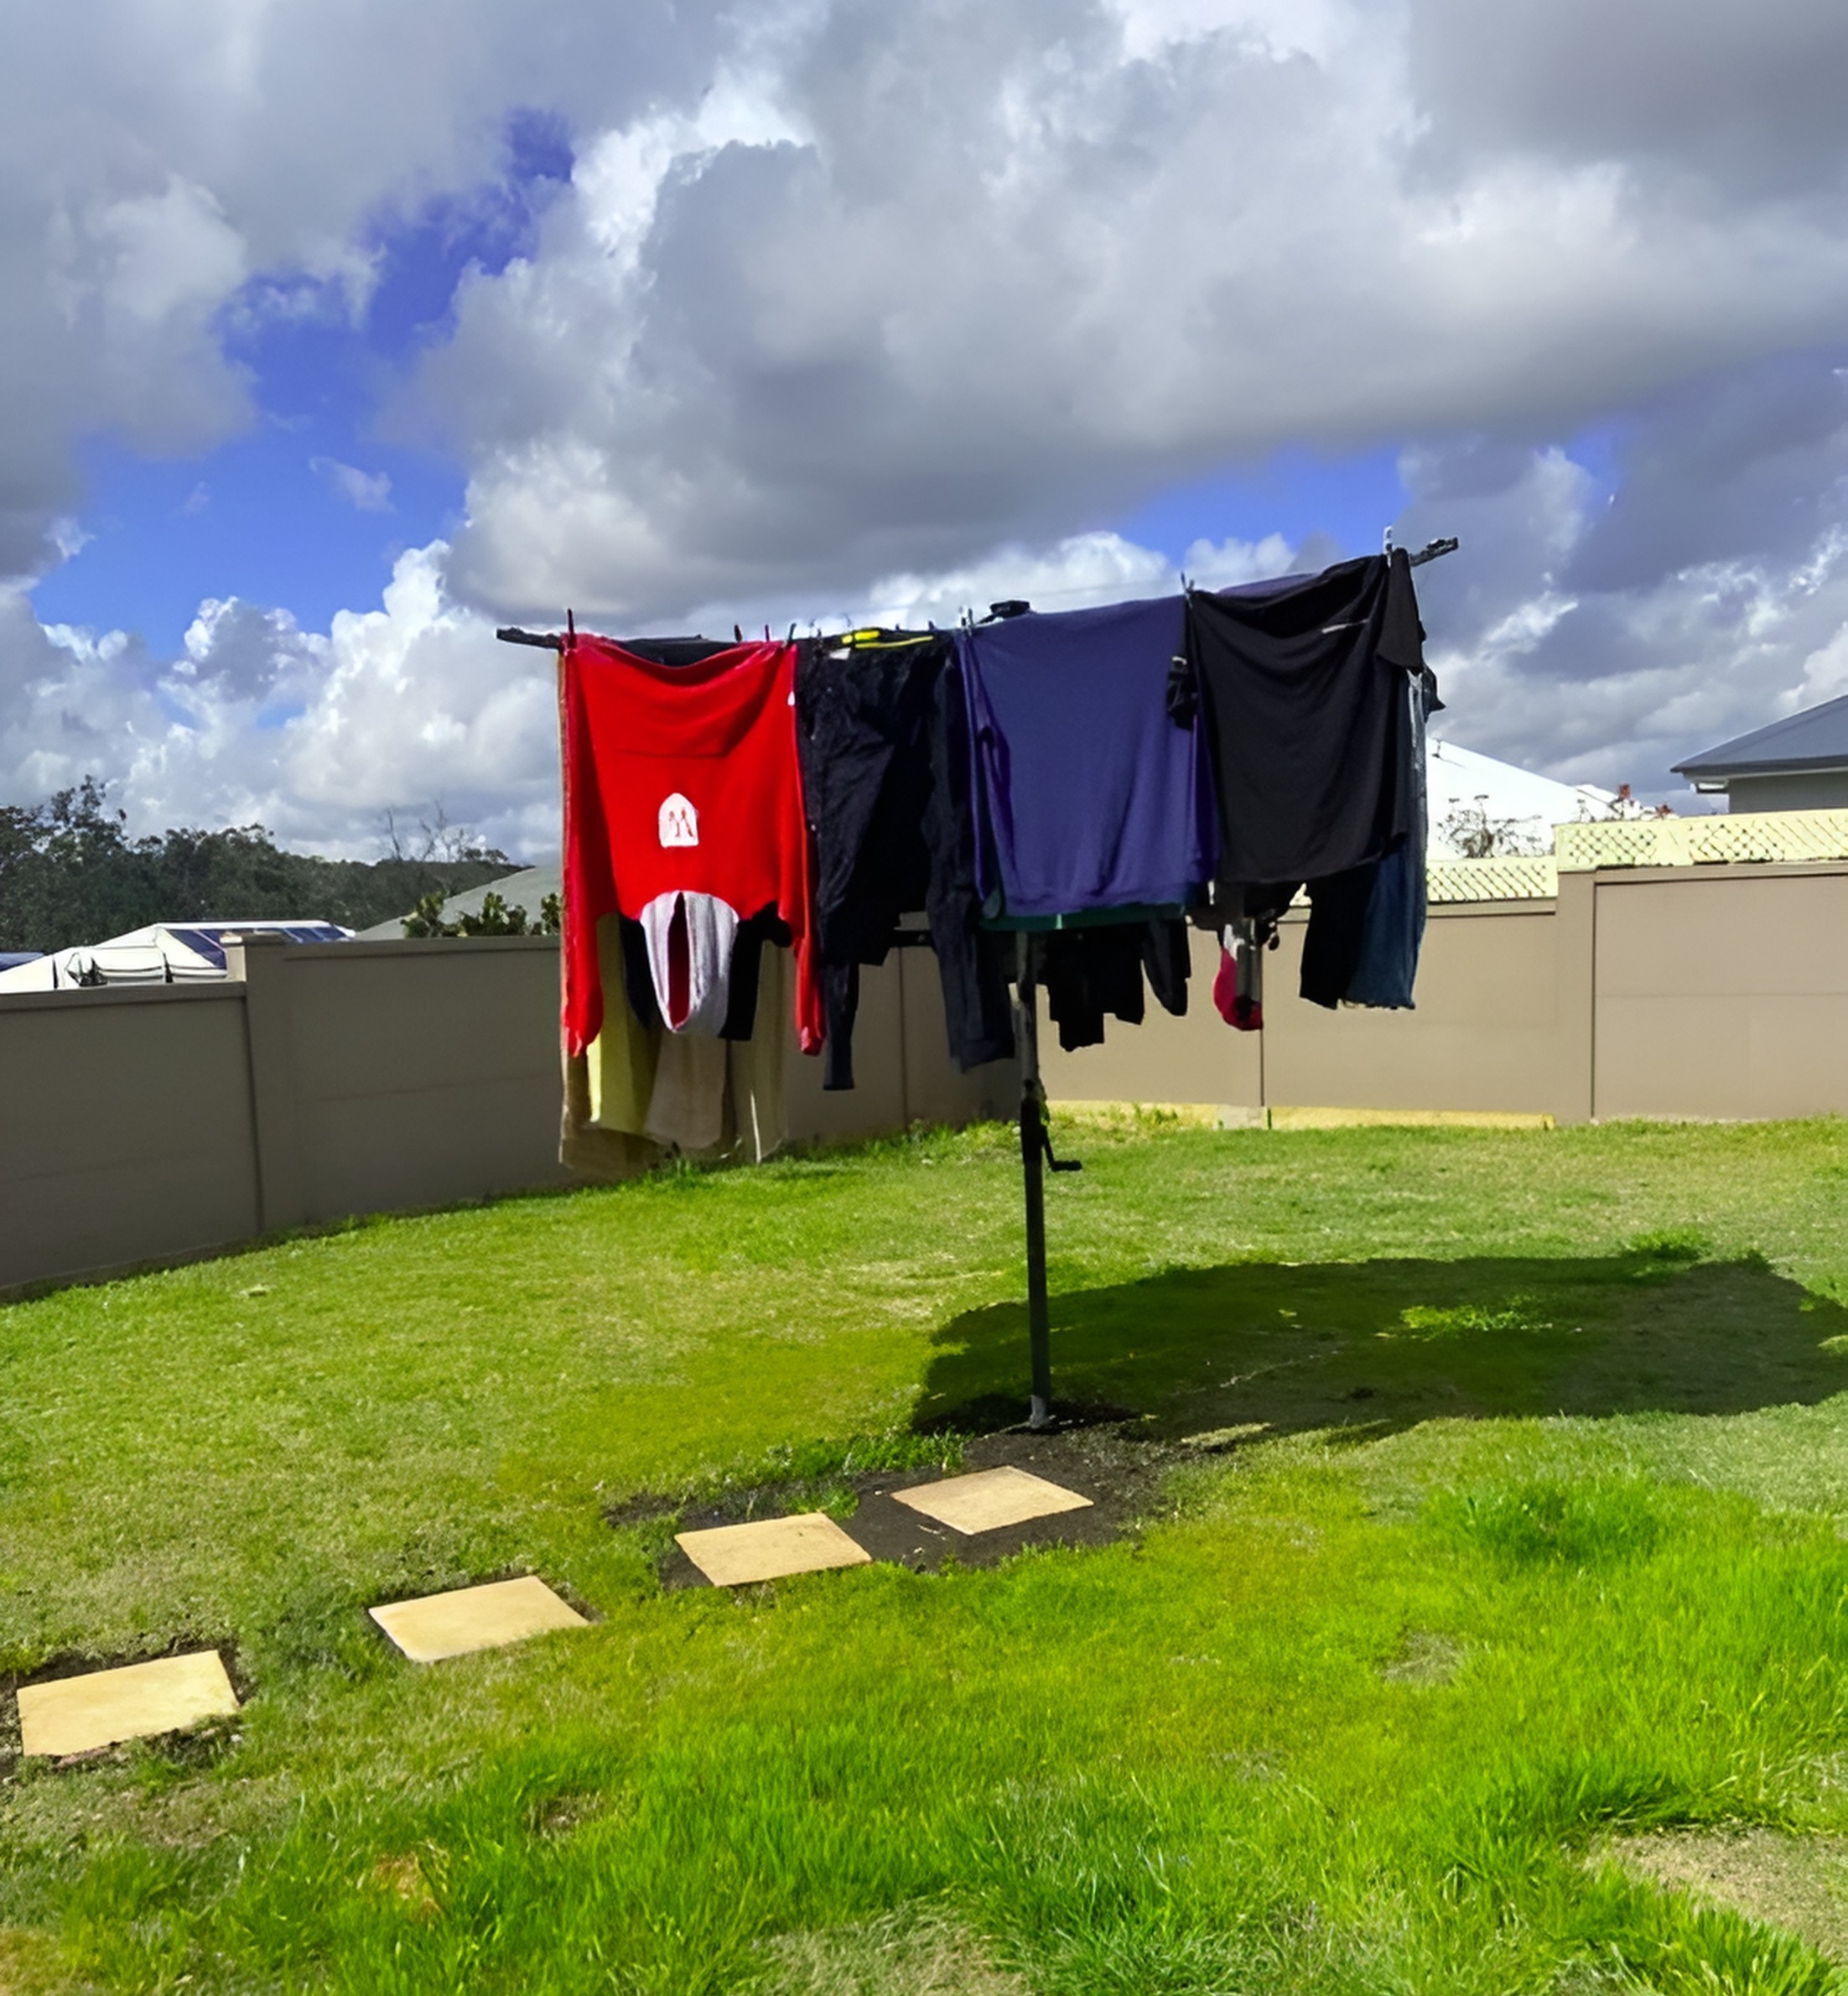 All You Need to Know About Fold Away Clothesline 1. Features to Look For in a Fold Away Clothesline